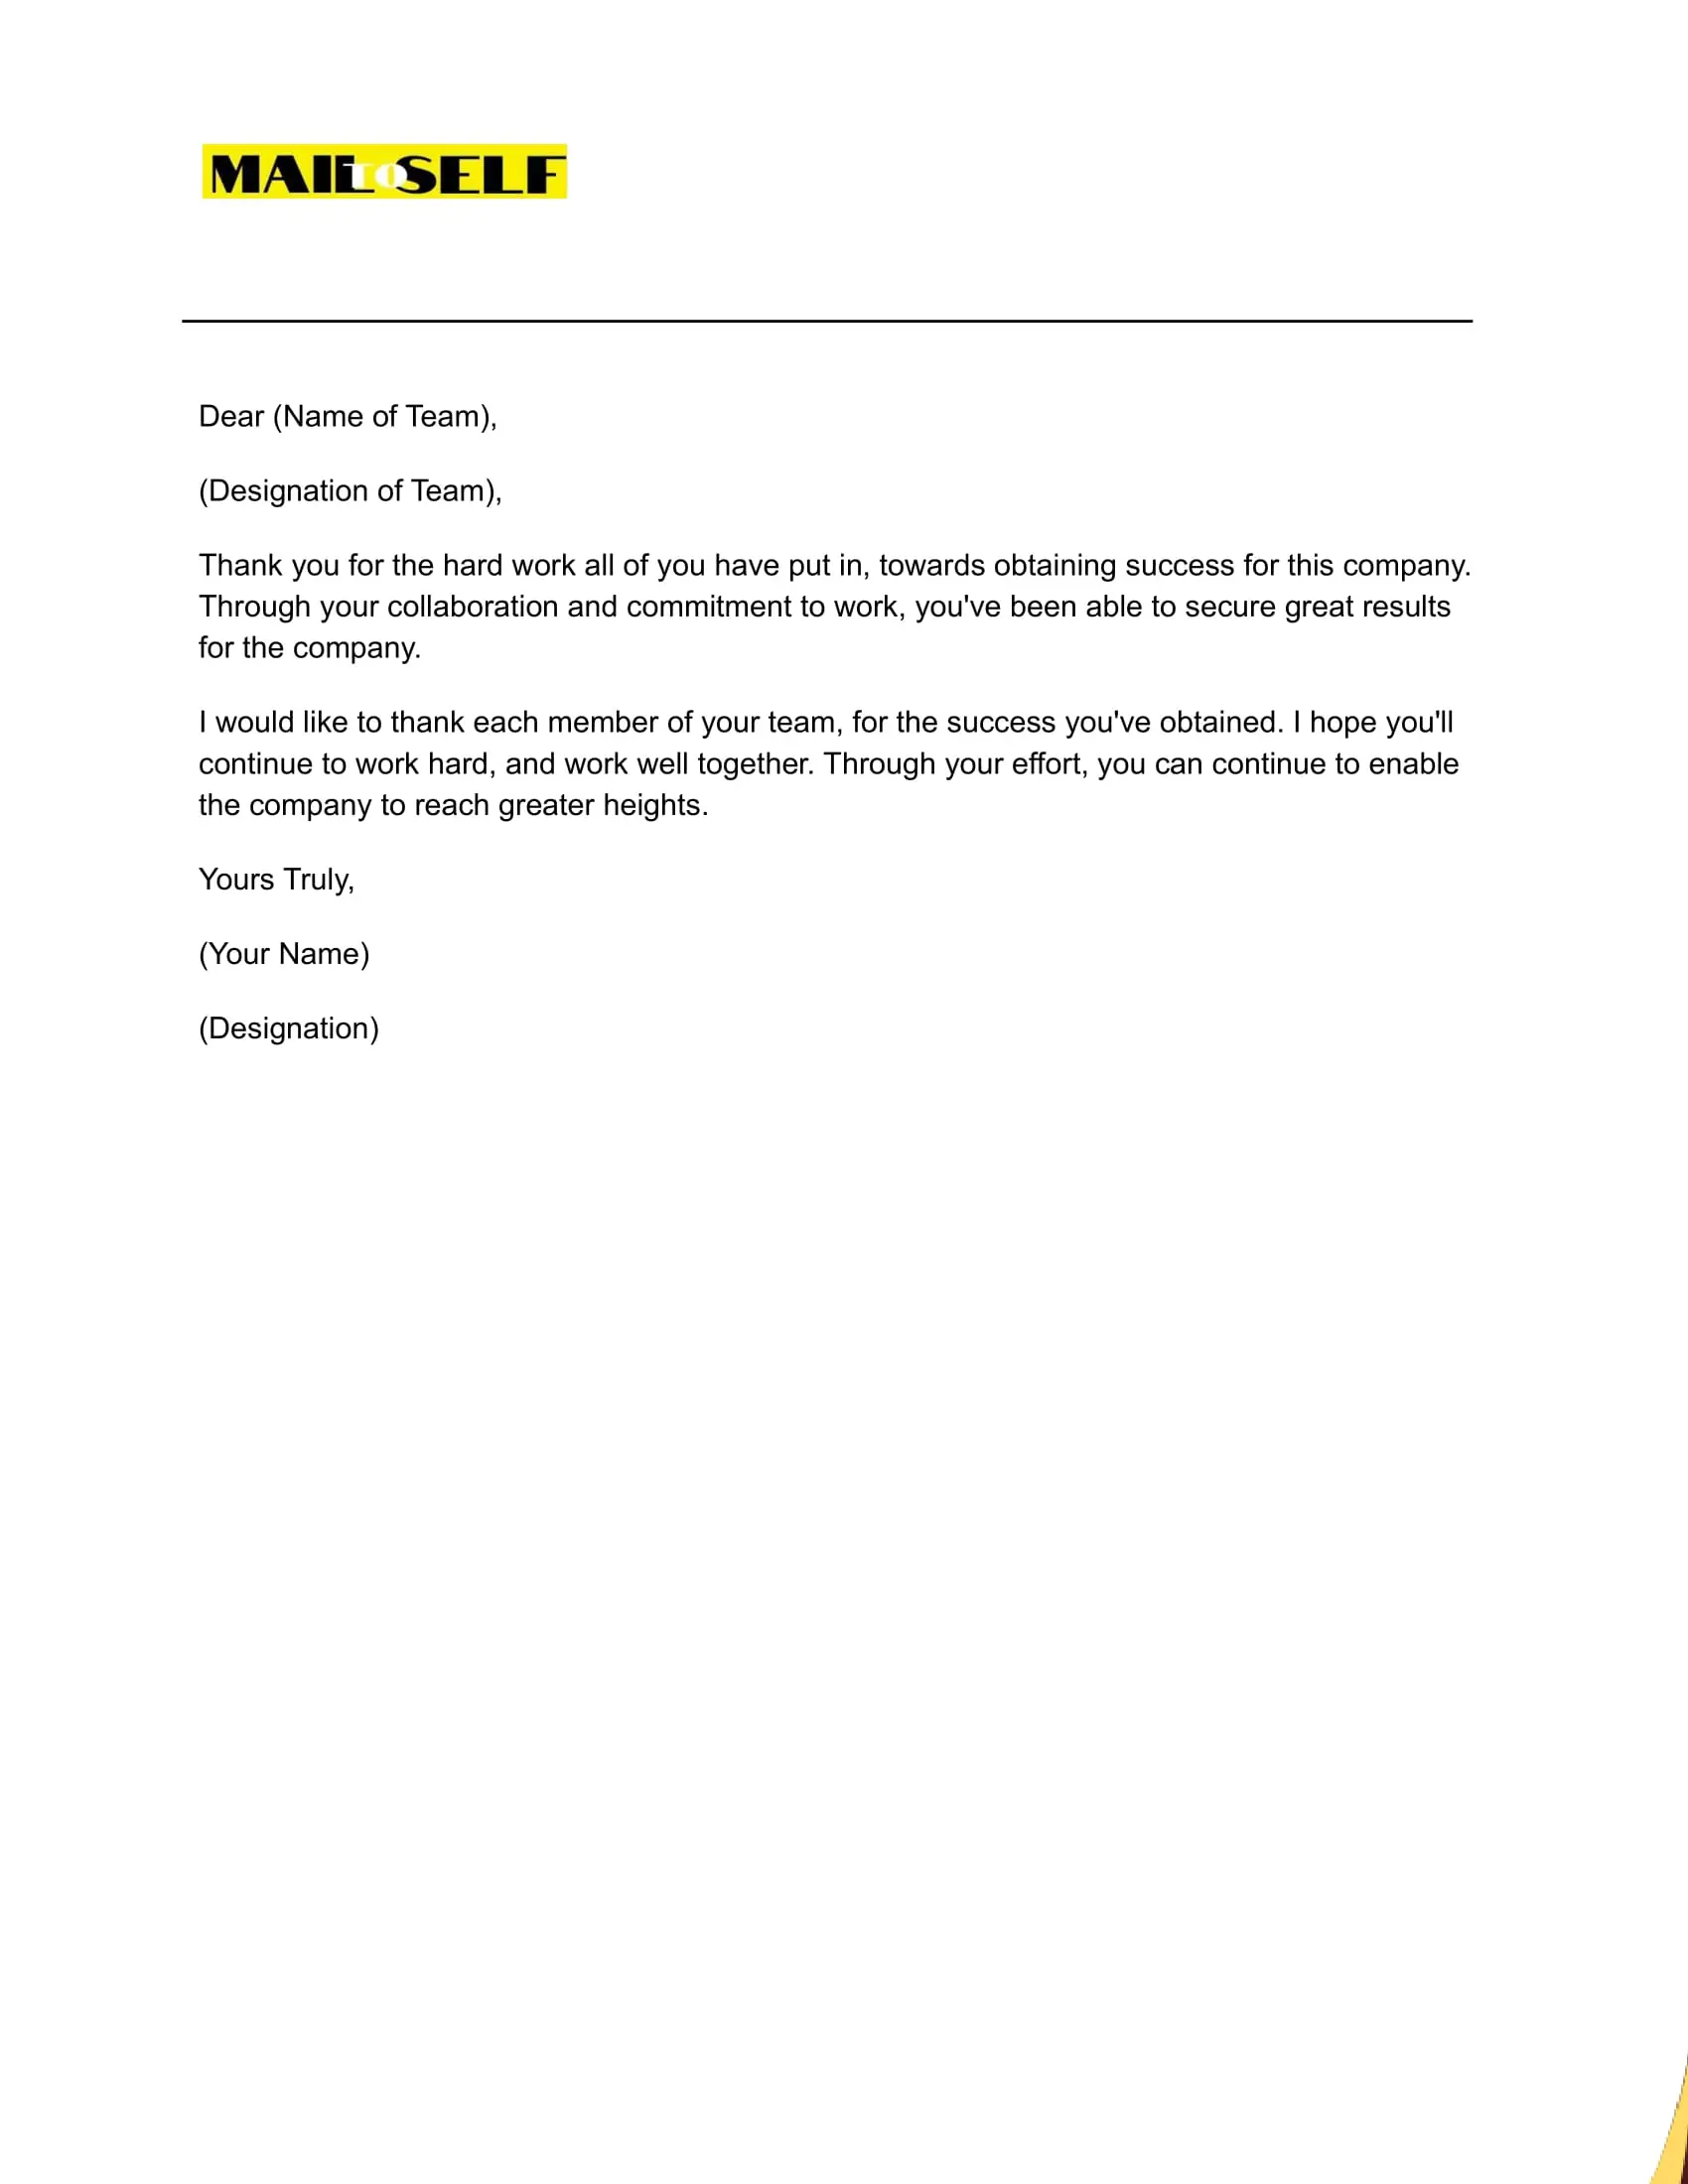 Sample #3 Thank You Letter to Employees for Excellent Performance